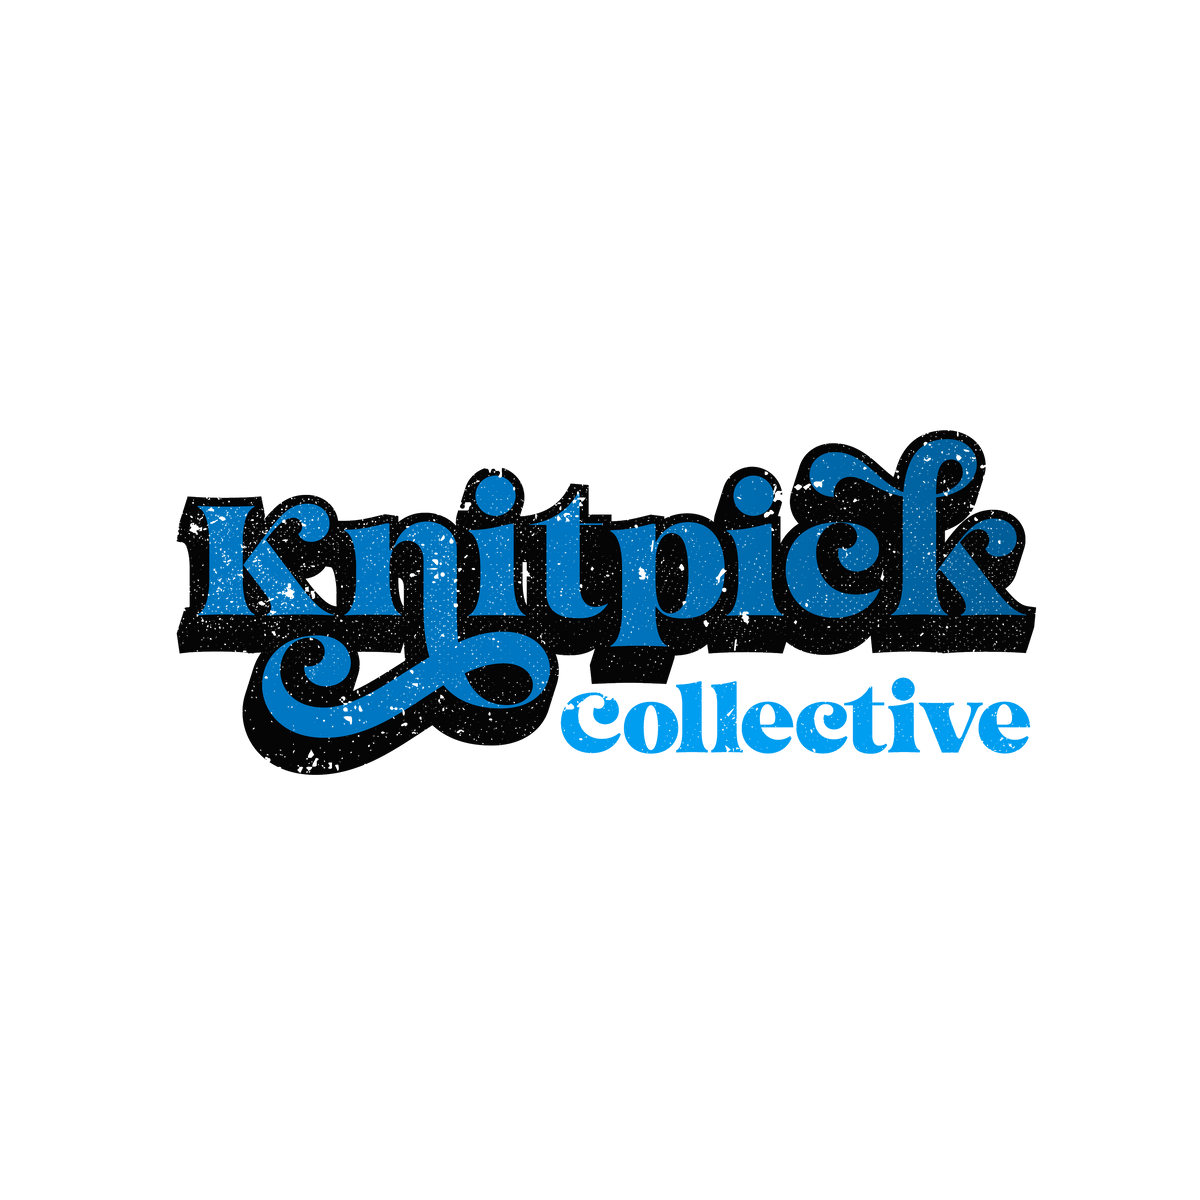 Knitpick Collective T-Shirt